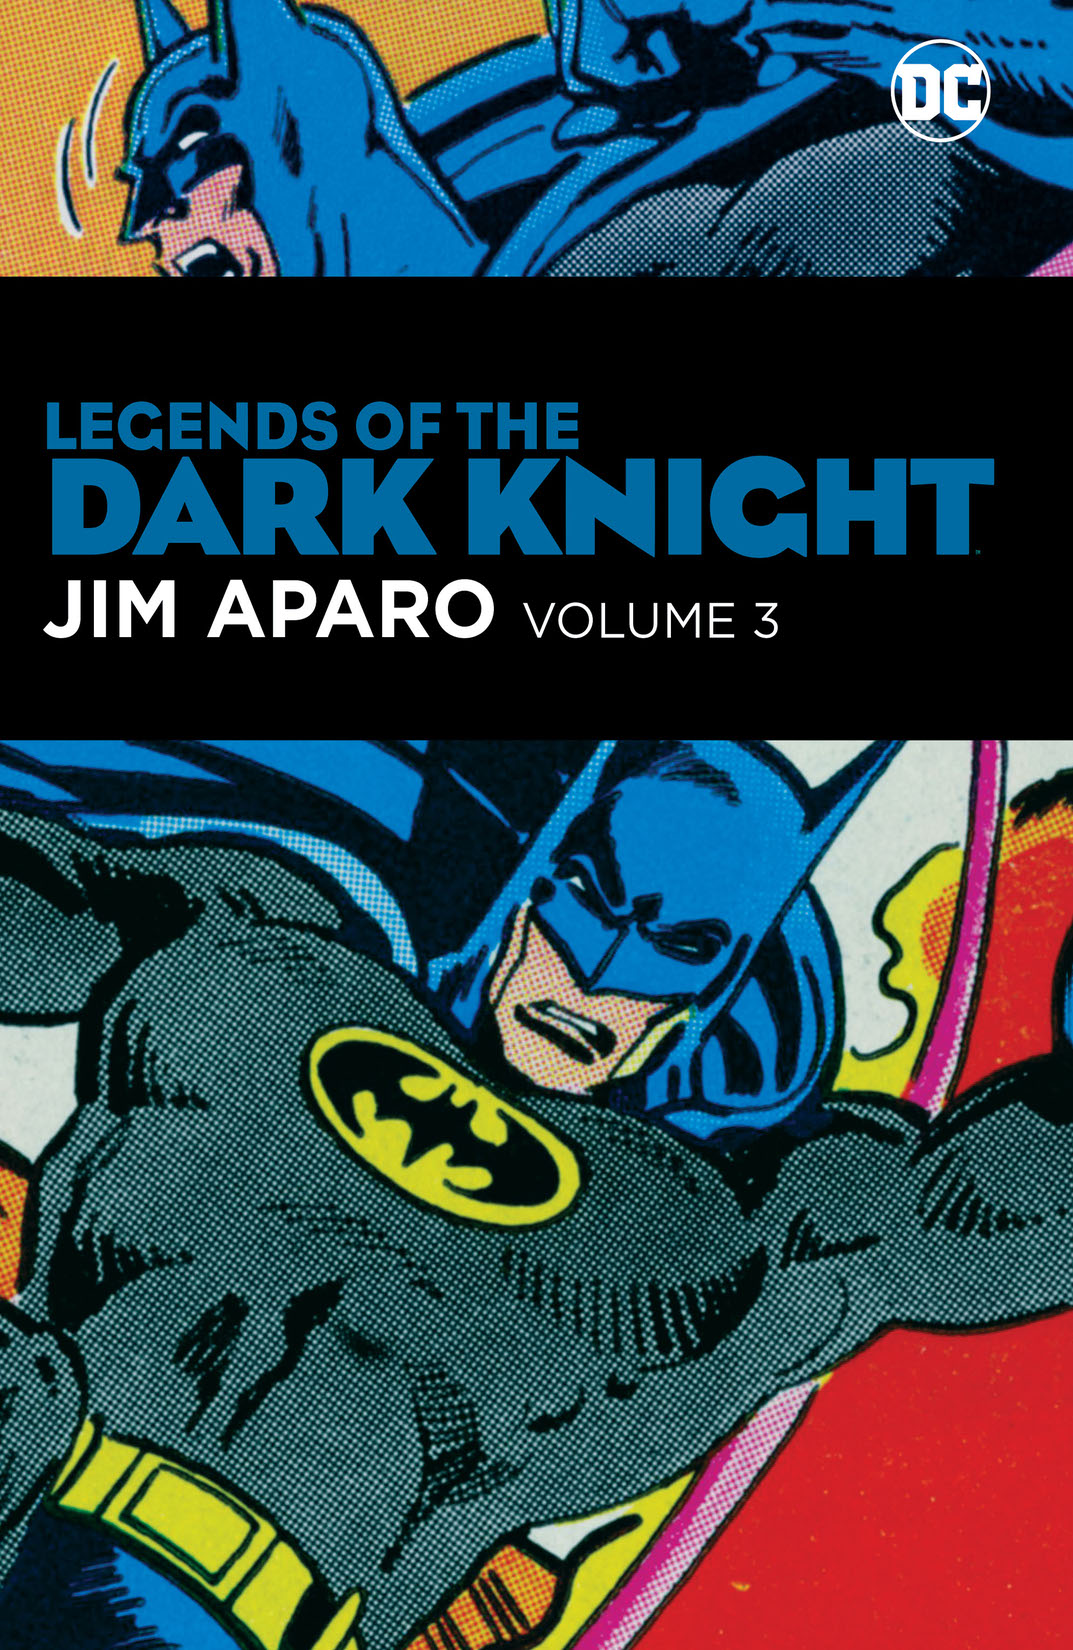 Legends of the Dark Knight: Jim Aparo Vol. 3 preview images